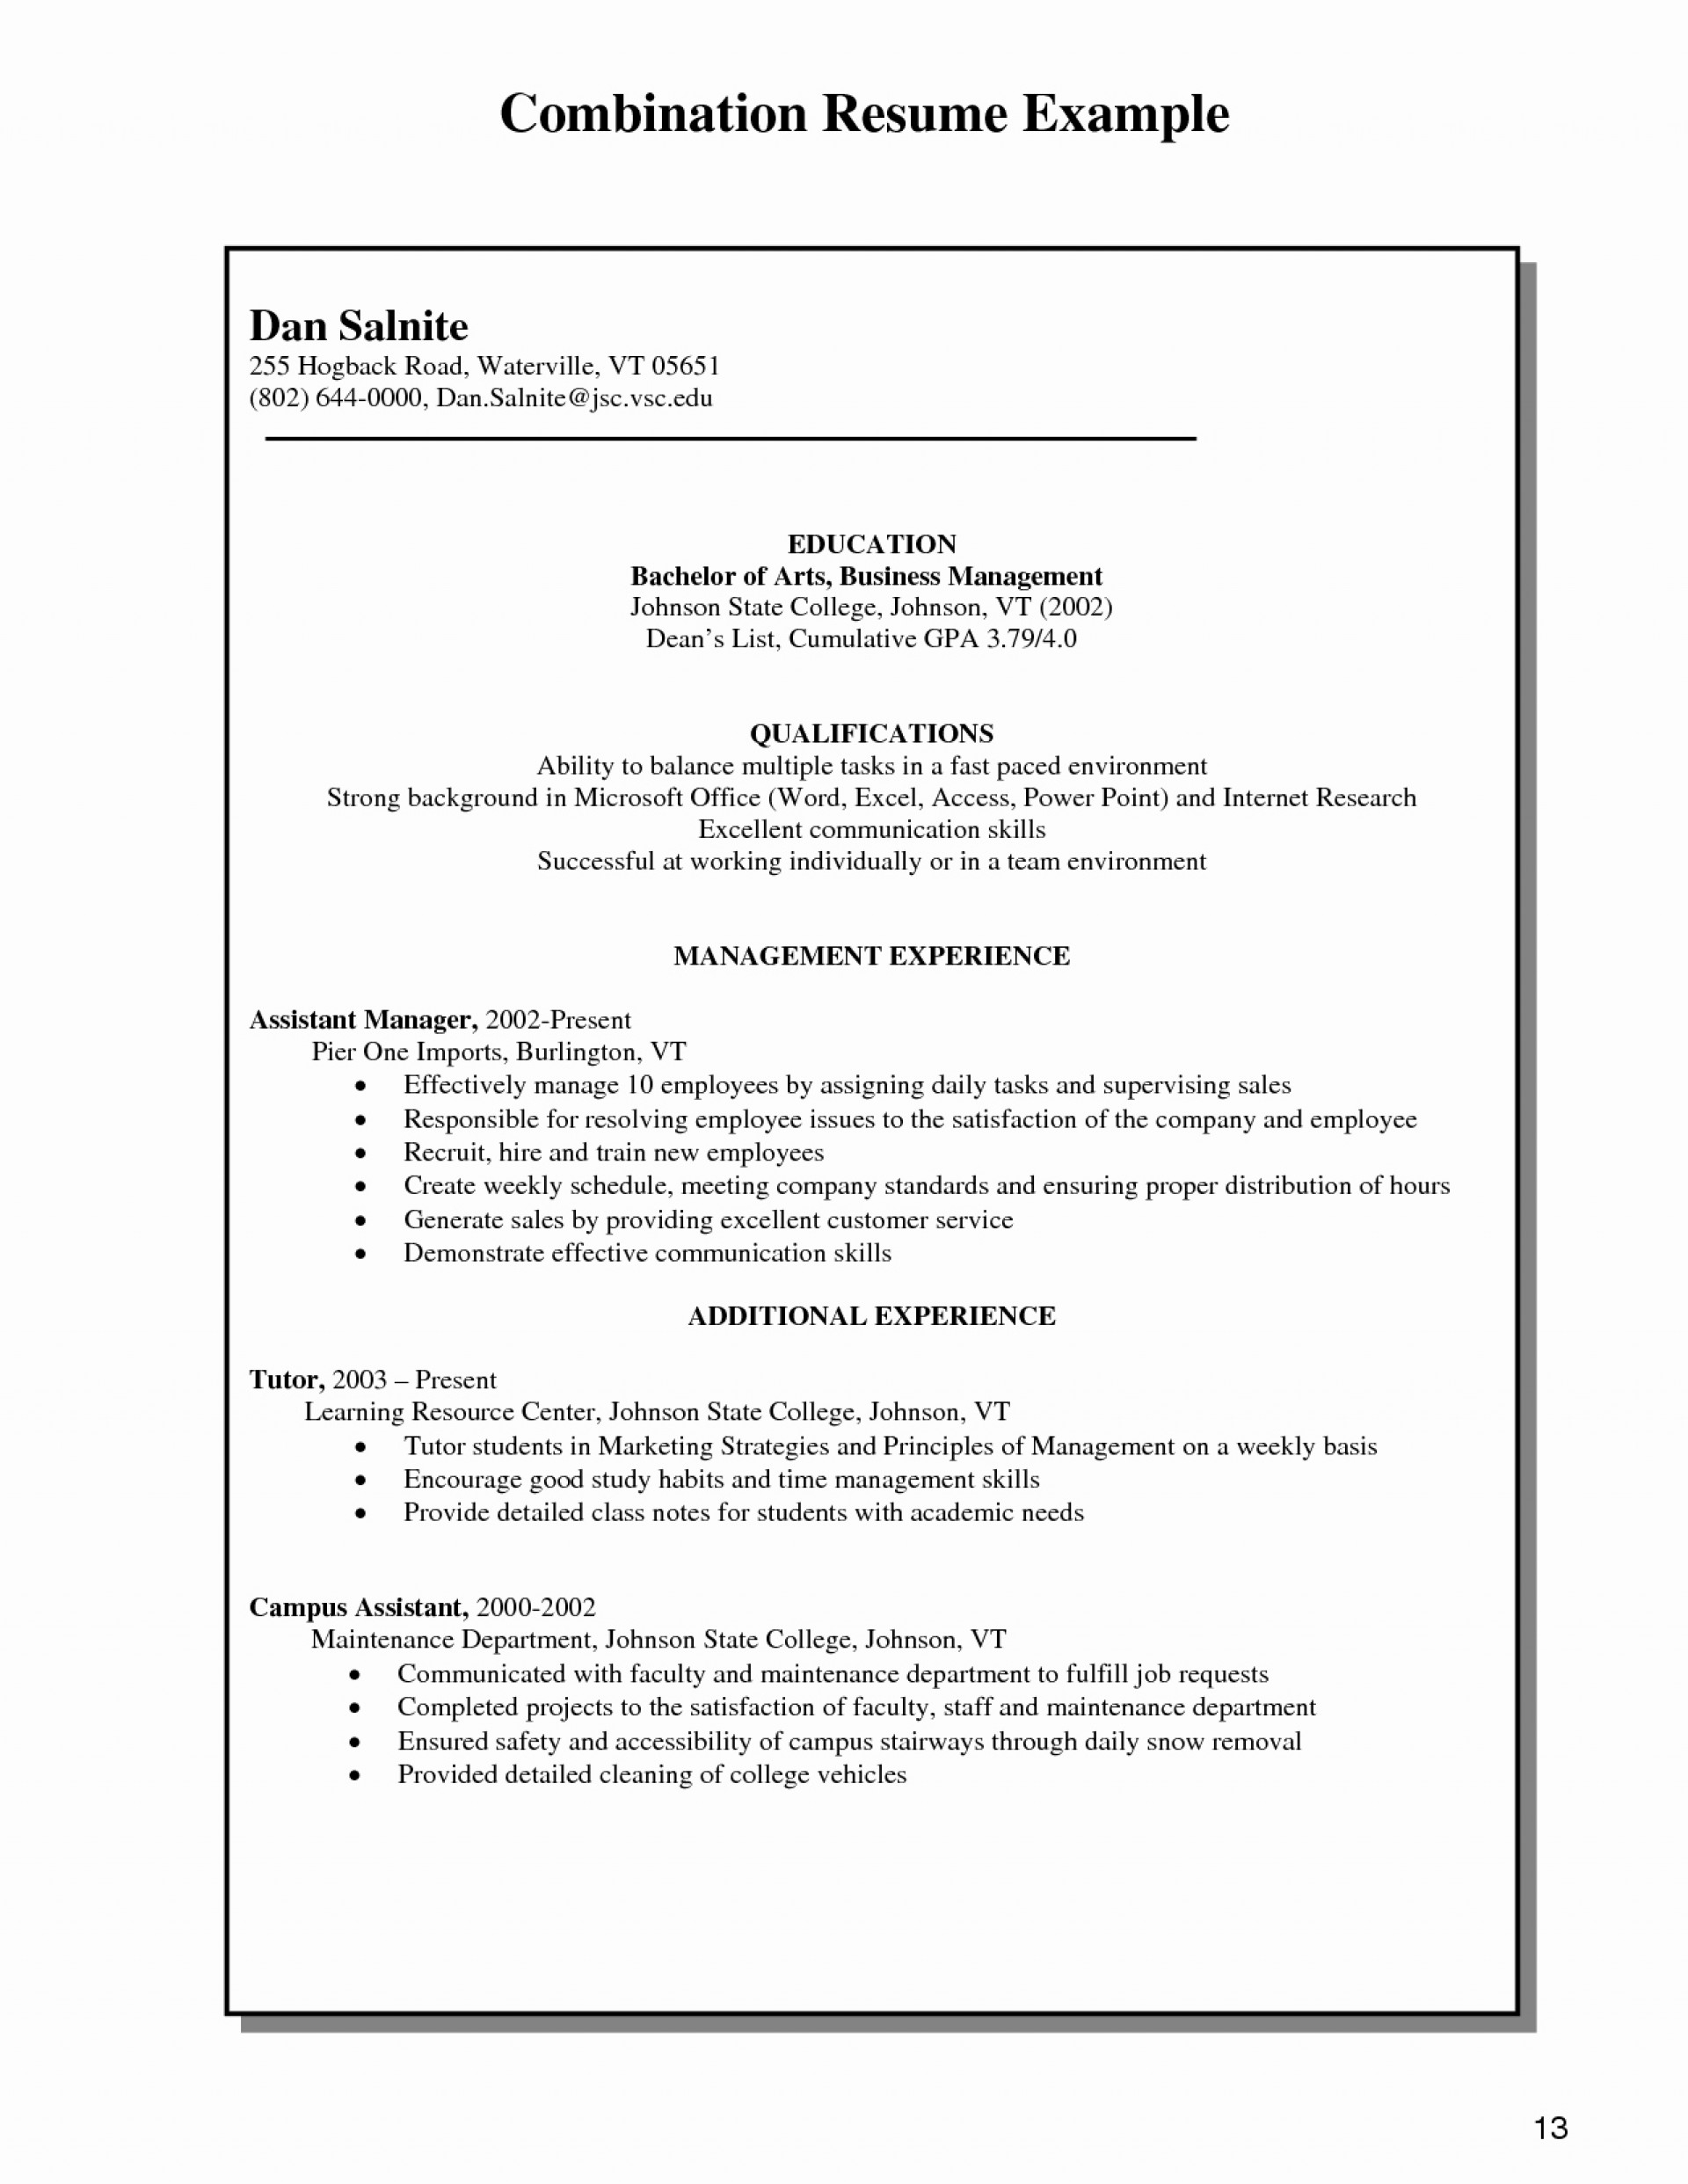 029 Combination Resume Template Word Free Templates 27 1 Intended For Combination Resume Template Word